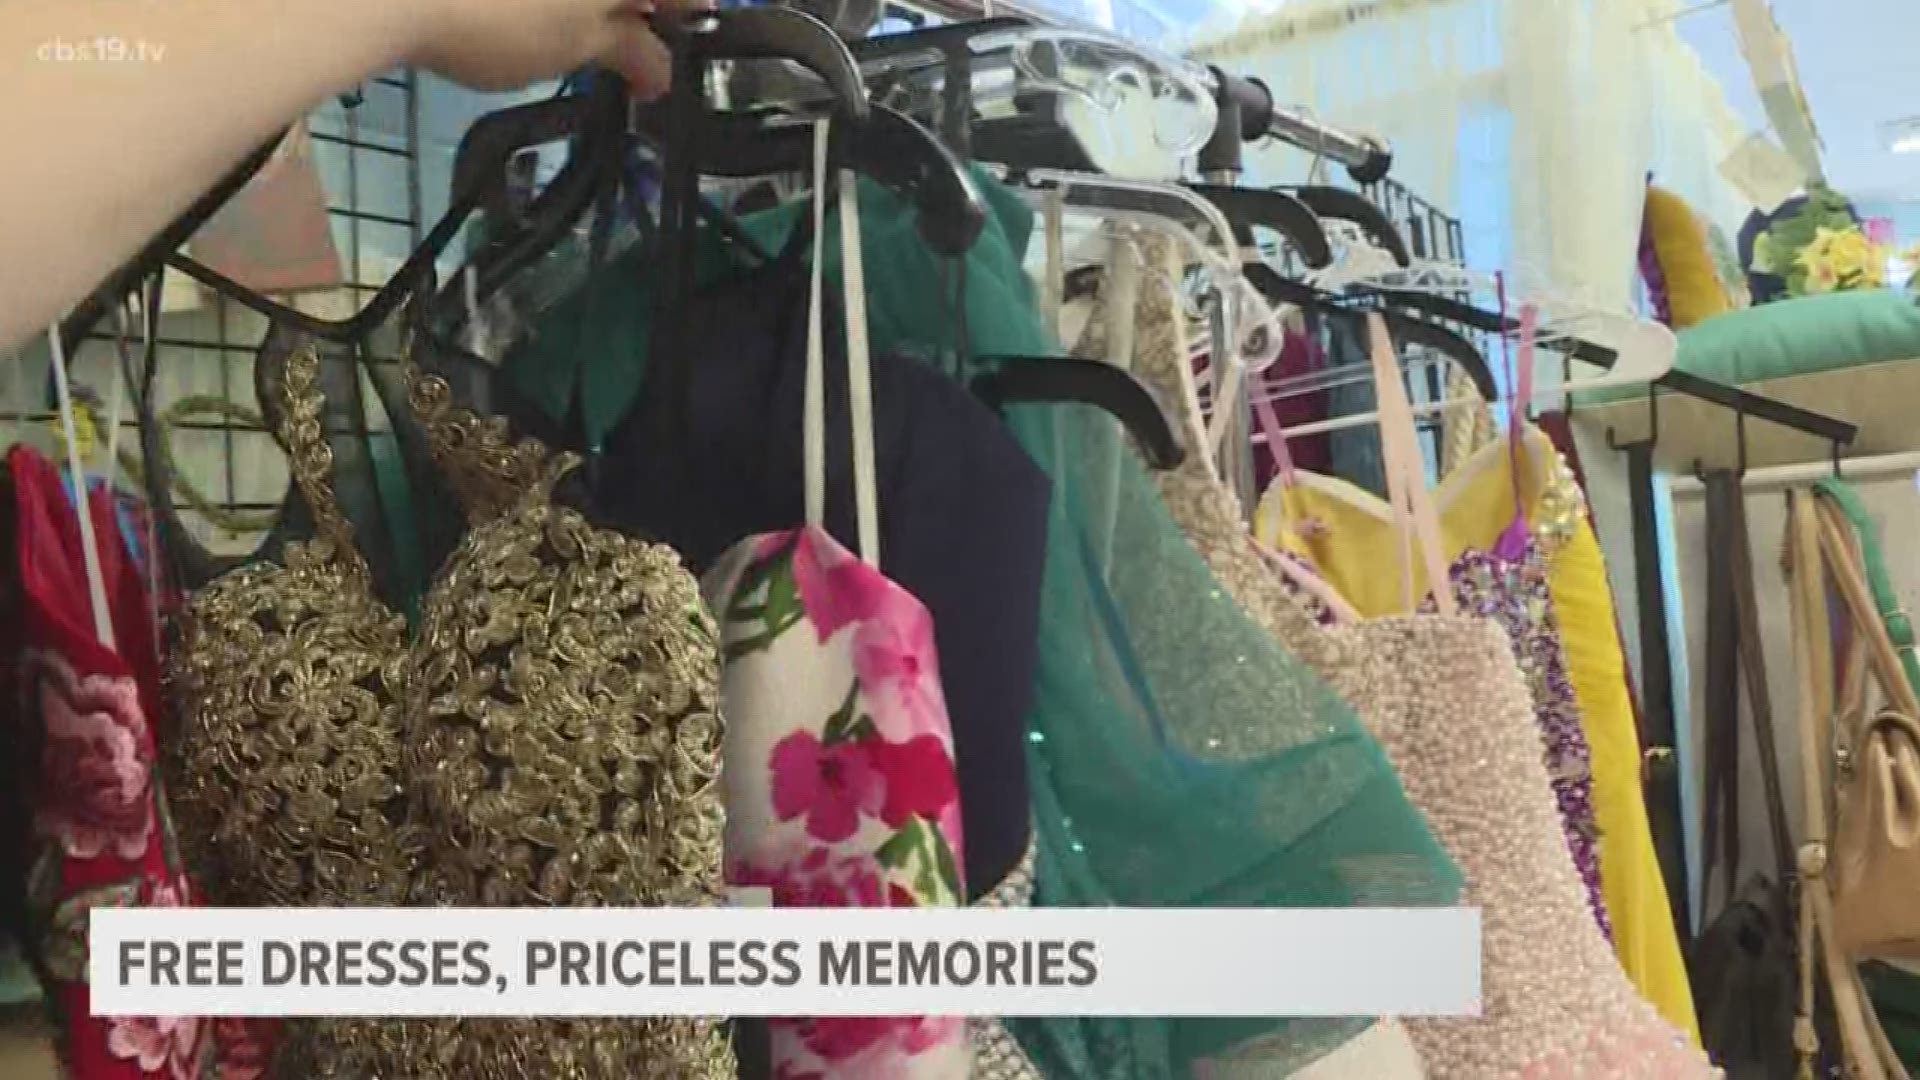 There are few events as special in a young person's life as their senior prom. A local organization is doing its job to help those who are in need of a dress before the big night.